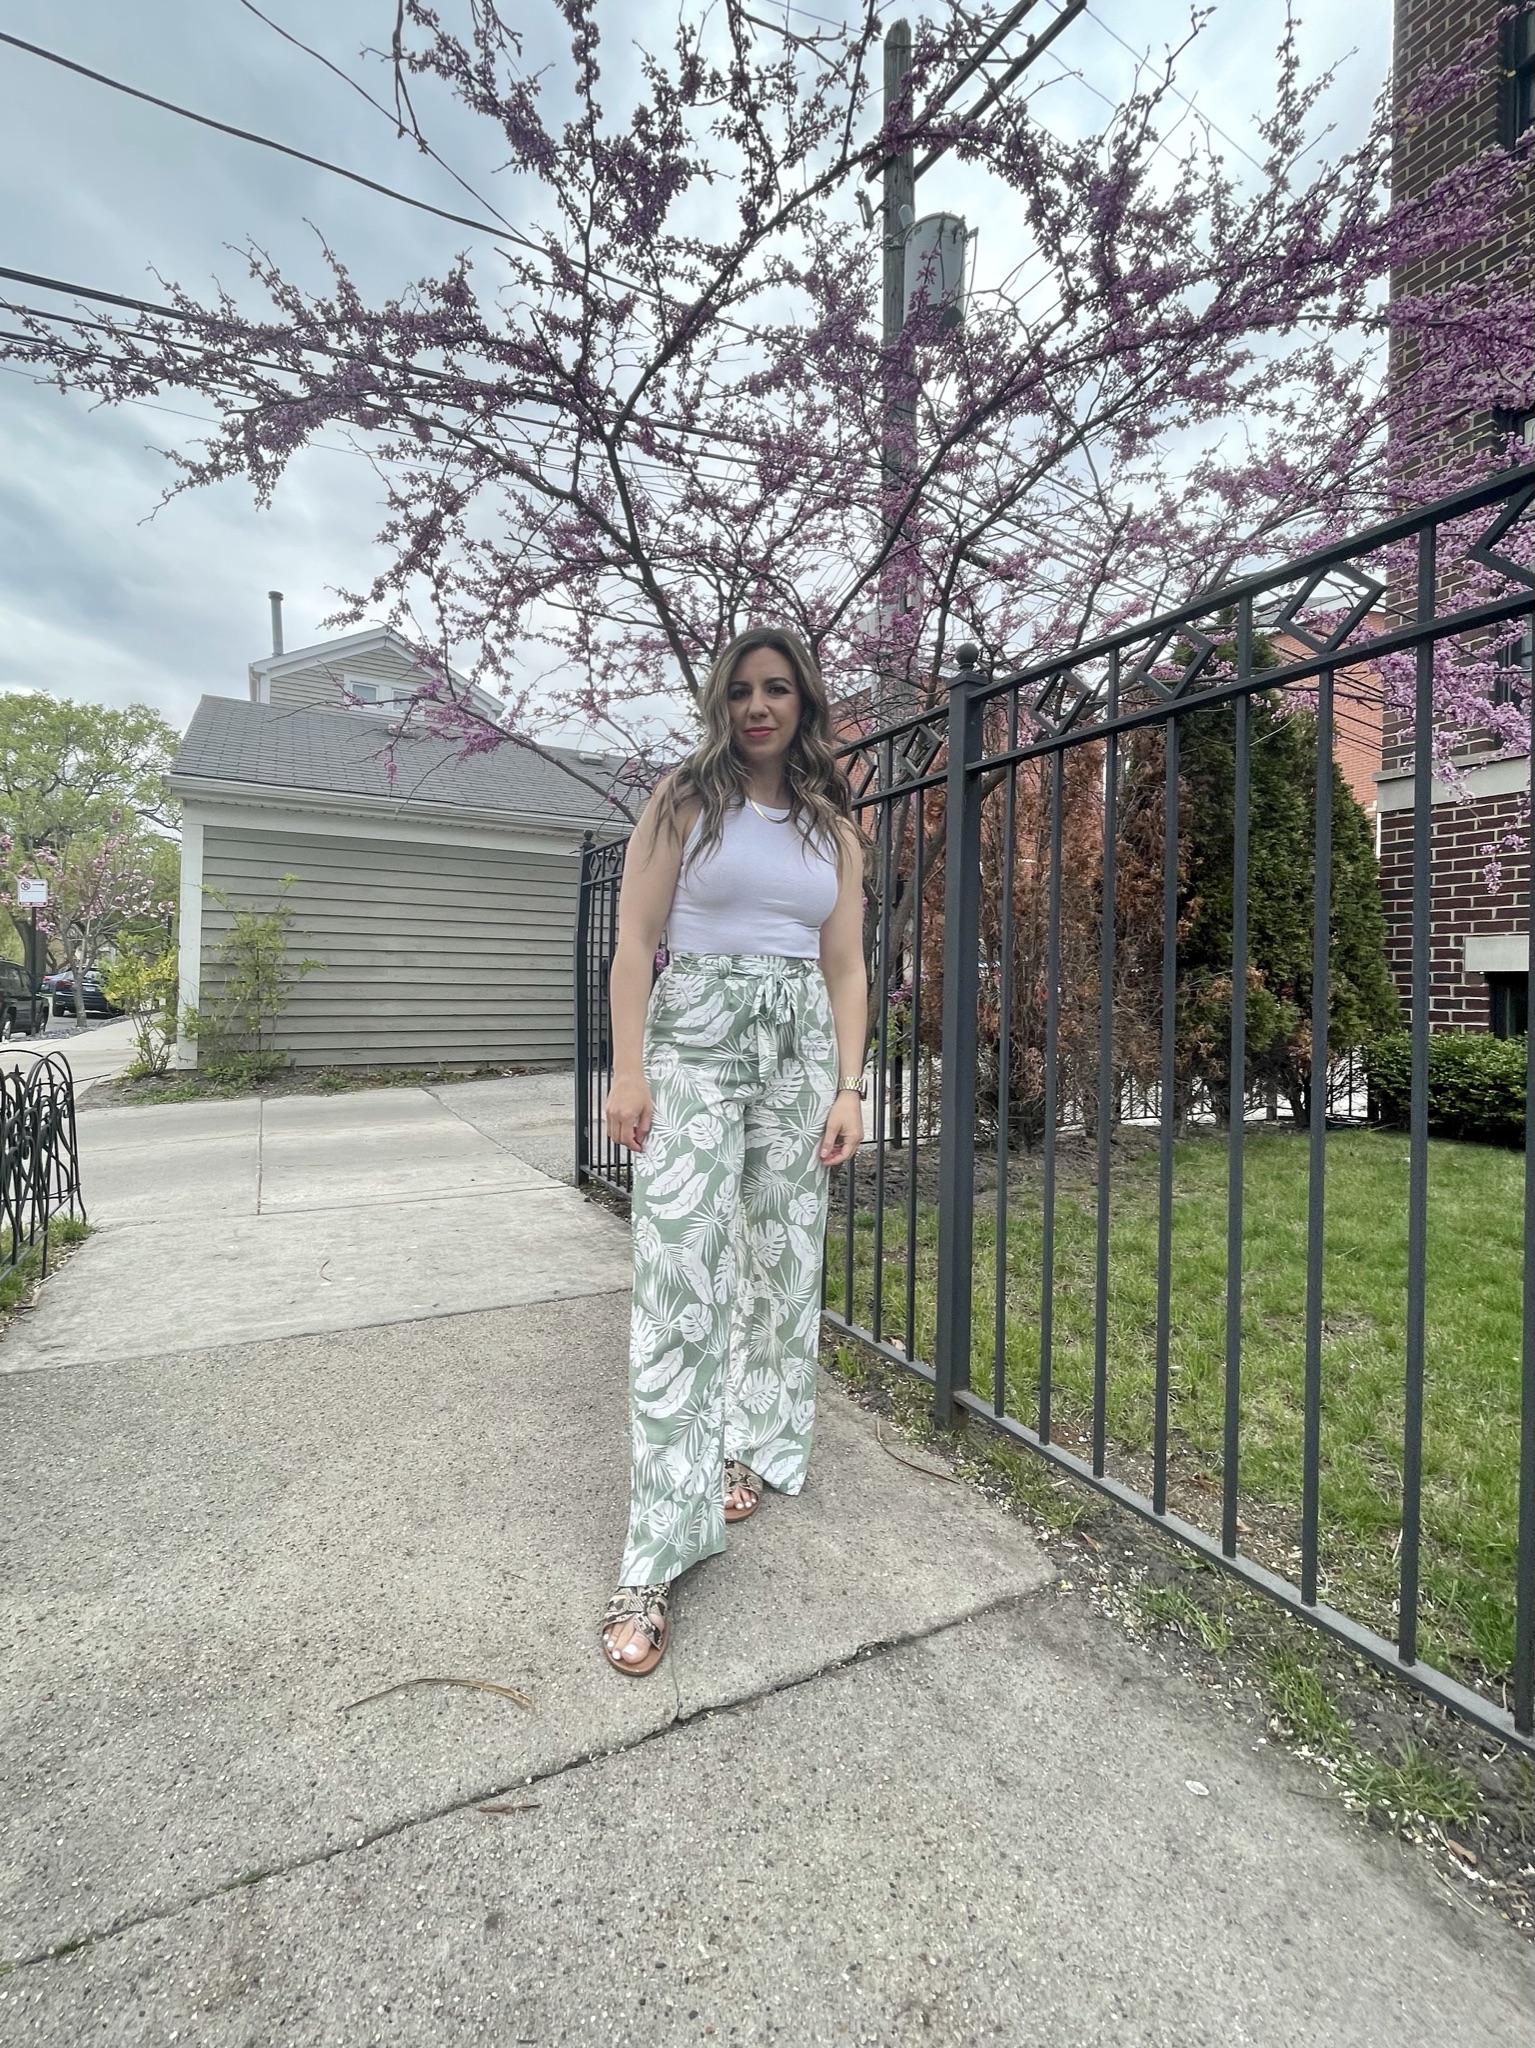 Statement Pants by popular Chicago fashion blog, Glass of Glam: image of a woman standing outside and wearing a pair of green tie waist leaf print pants, slide sandals, and a white tank top.